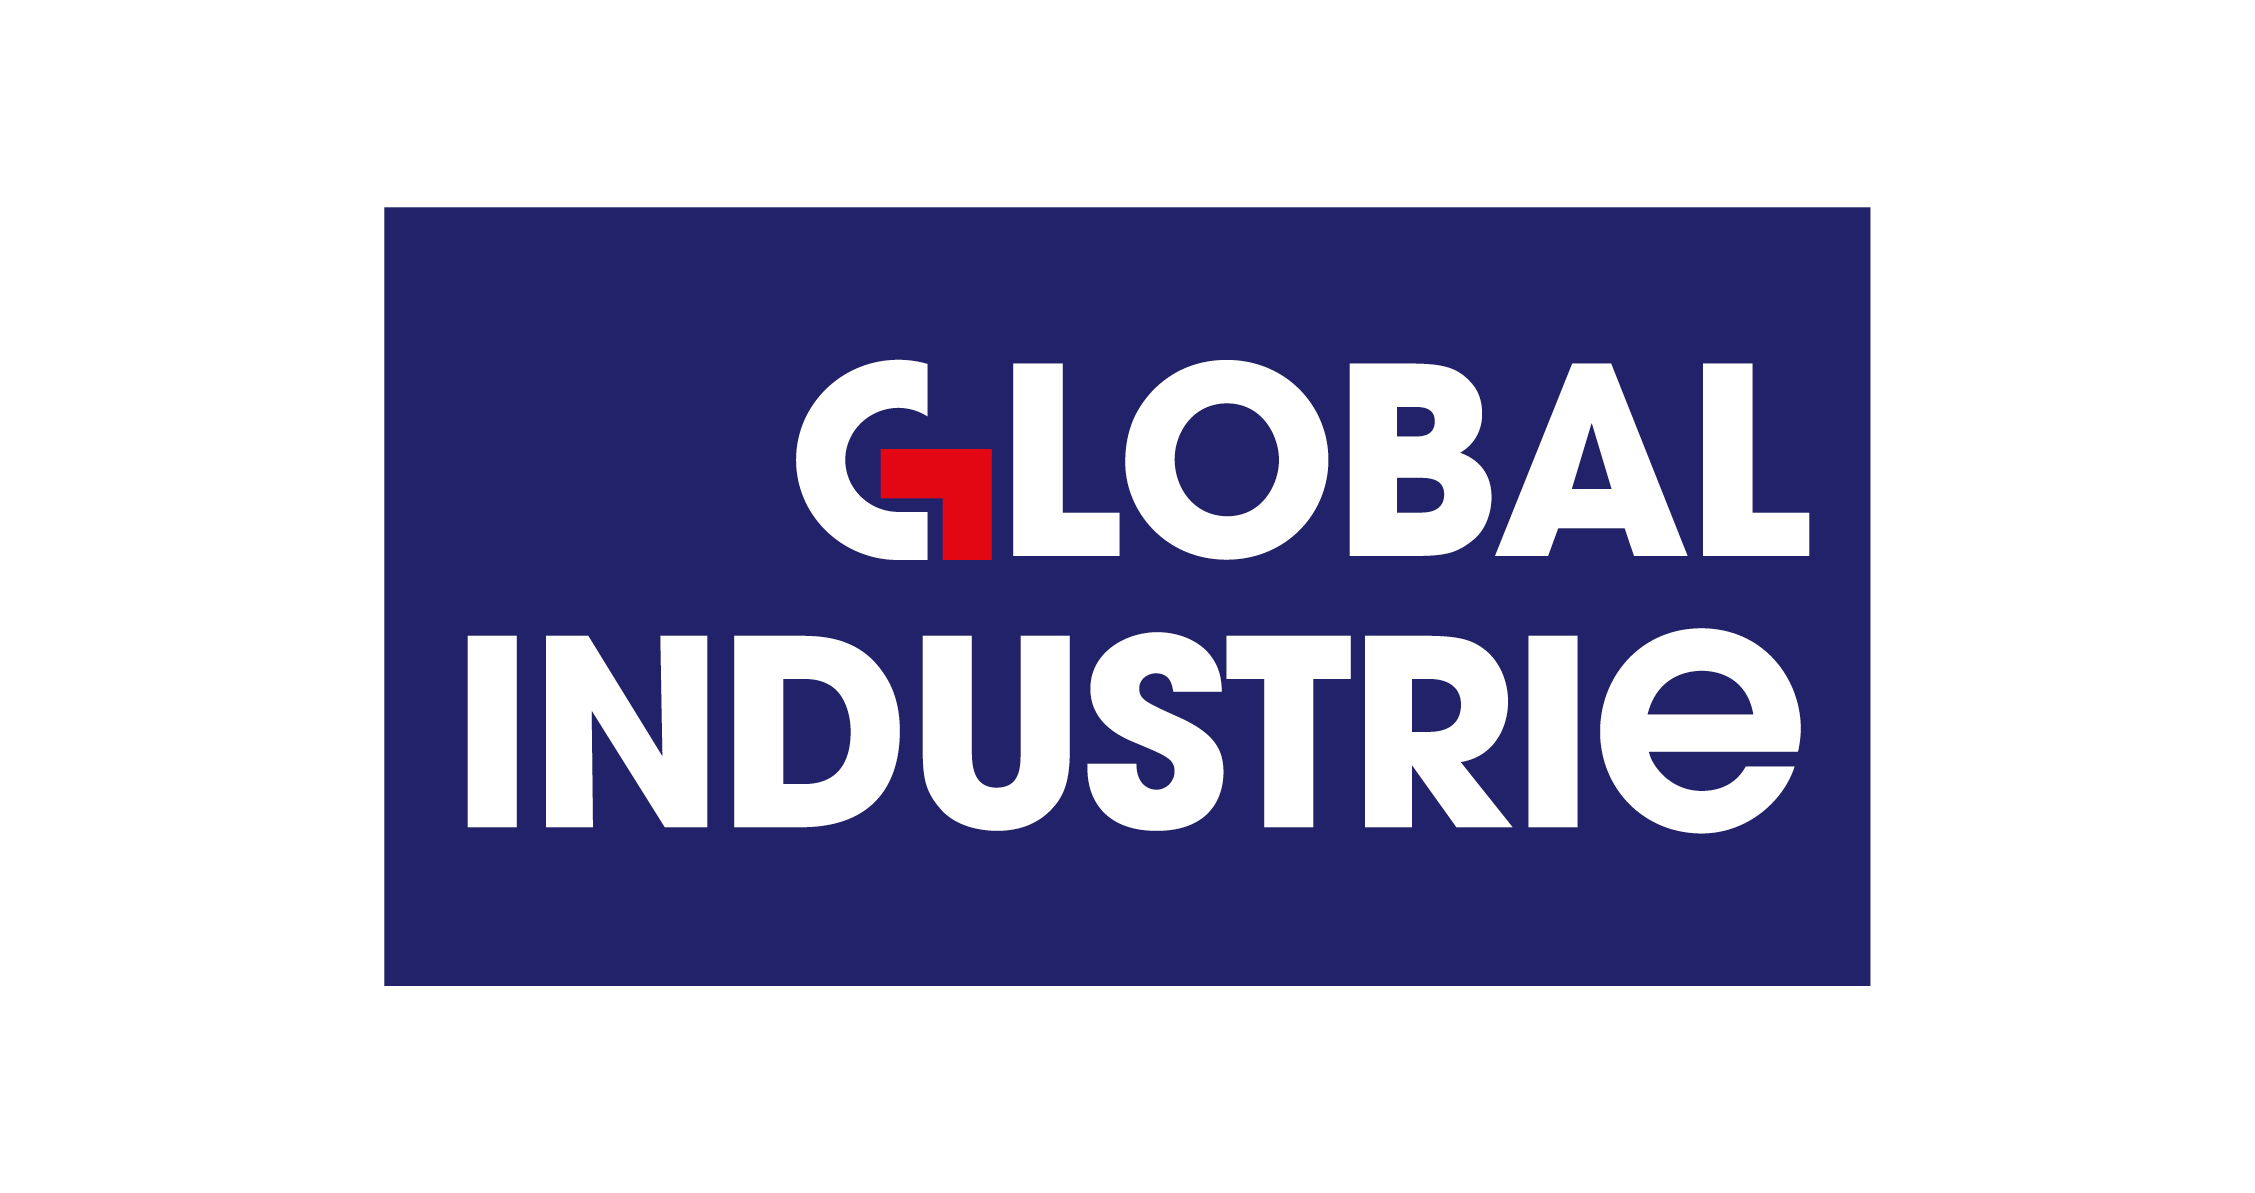 Global Industrie exhibition